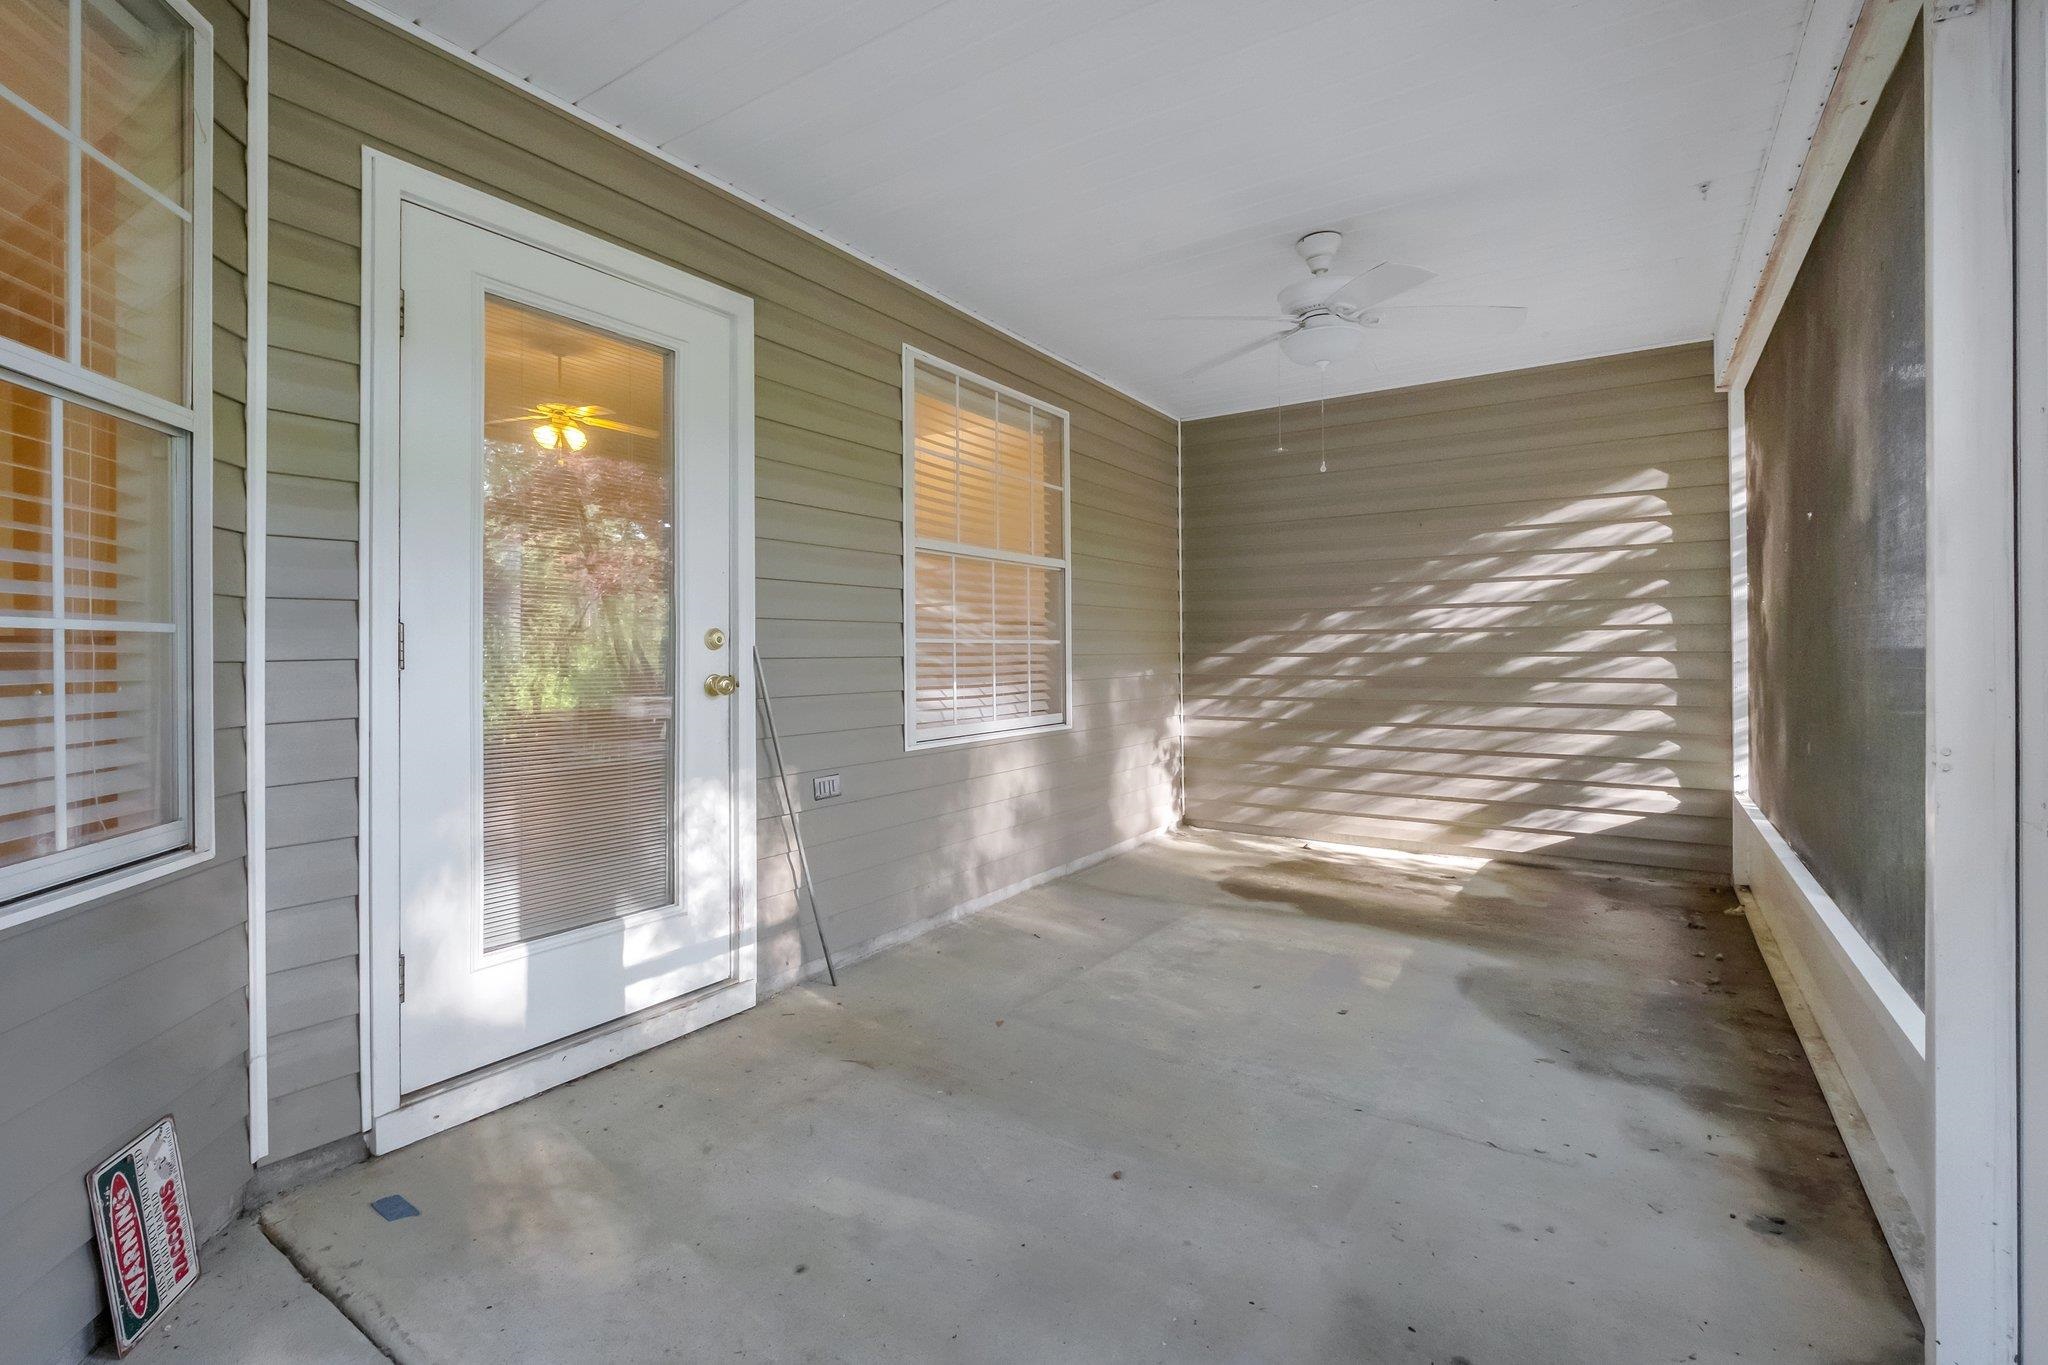 1043 Park View Drive,TALLAHASSEE,Florida 32311,3 Bedrooms Bedrooms,2 BathroomsBathrooms,Detached single family,1043 Park View Drive,370305